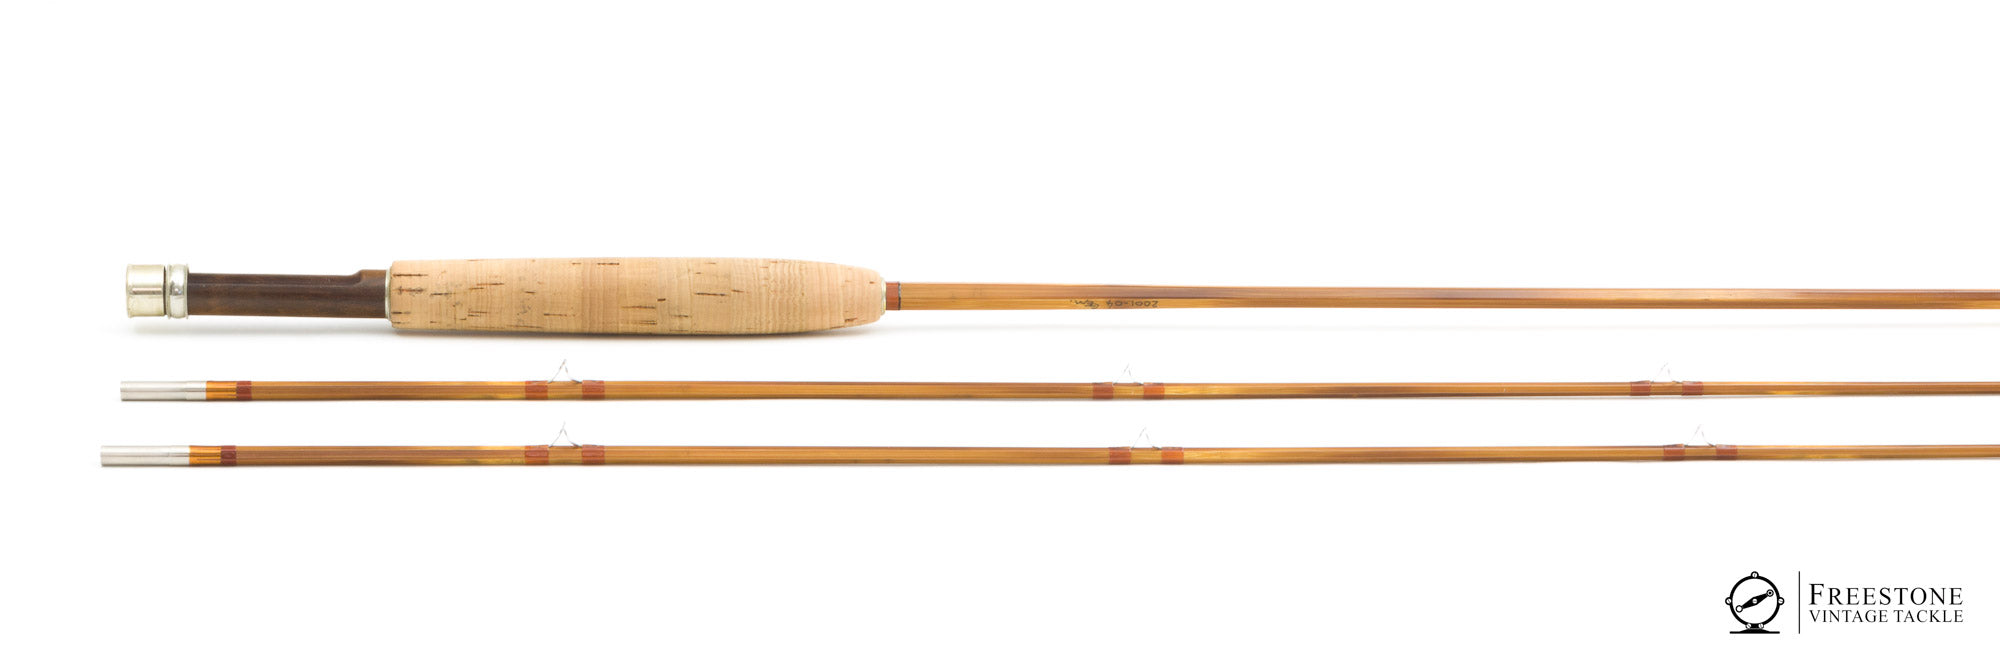 Maurer, George (Sweet Water Rods) - Trout Bum 8' 2/2 5wt Bamboo Rod -  Freestone Vintage Tackle